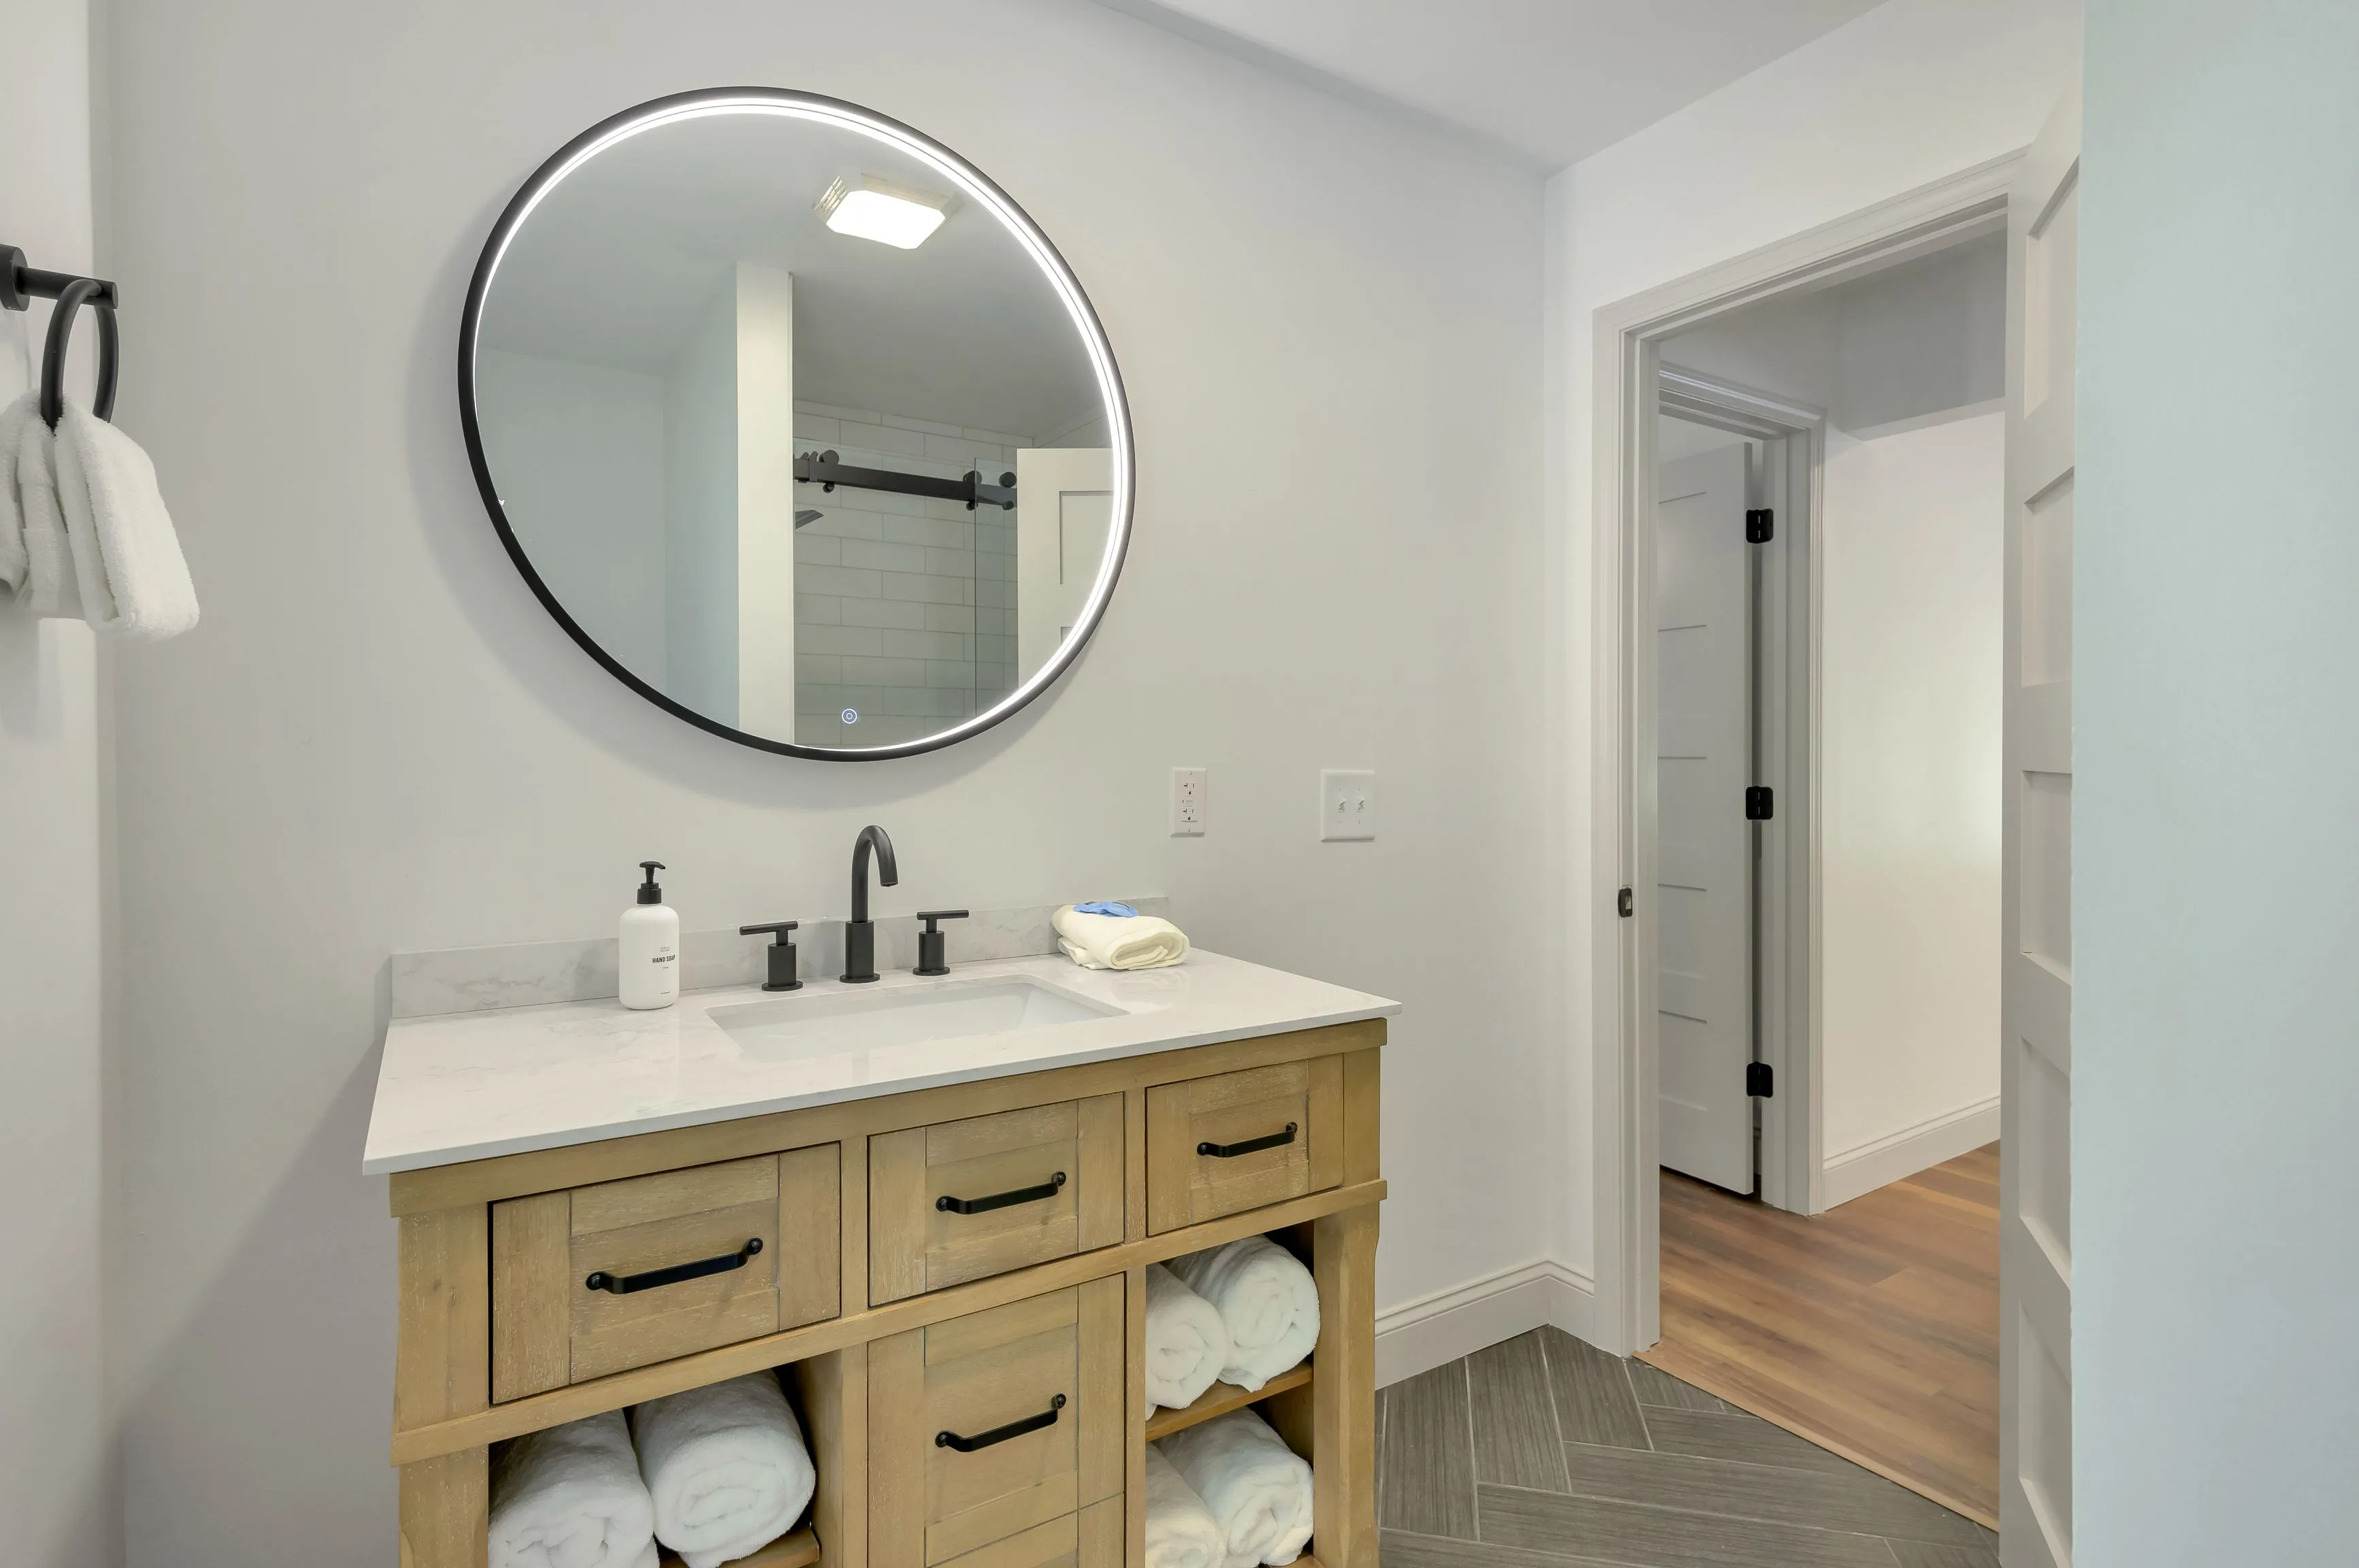 Modern bathroom interior with round mirror, wooden vanity with white countertop, and a view into the adjacent room.